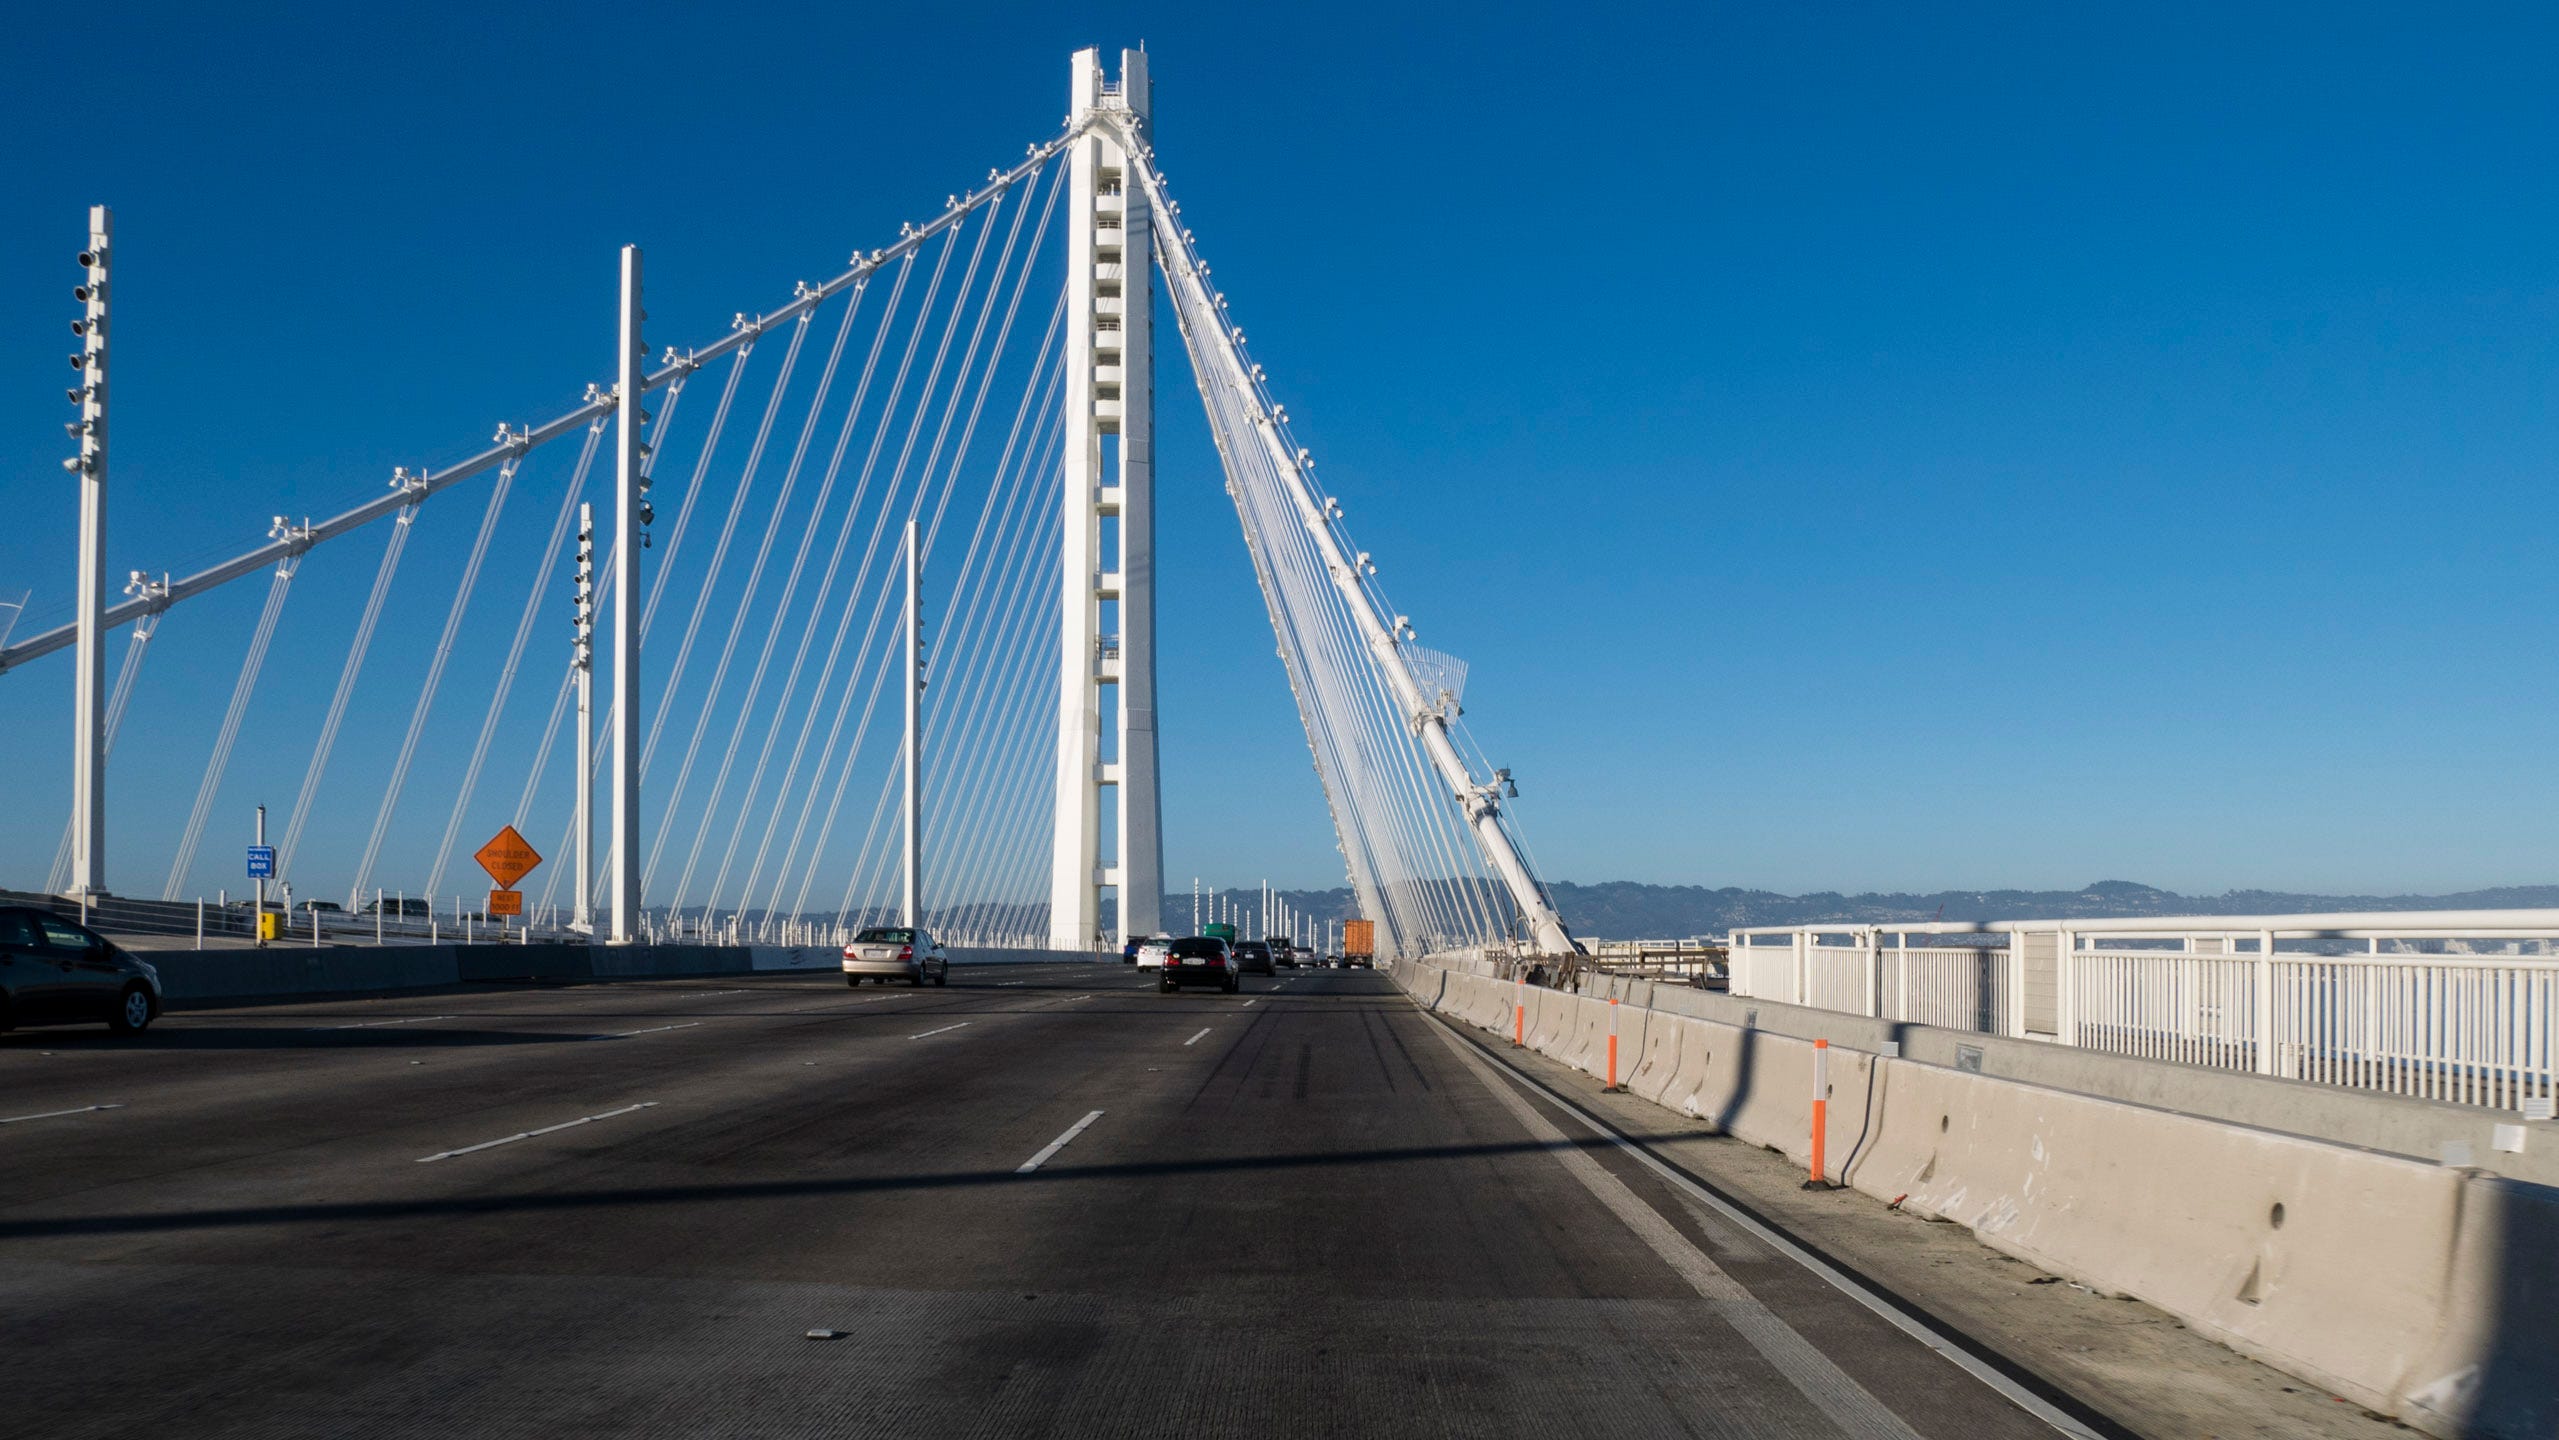 Photo from the right lane of the Bay Bridge. Ahead is a futuristic, gleaming white structural tower from which four thick support cables descend at approximately 45 degree angles to the bridge deck, creating a pyramidal shape of the structural units. Thinner cables extend downward from the four main cables towards the bridge deck.